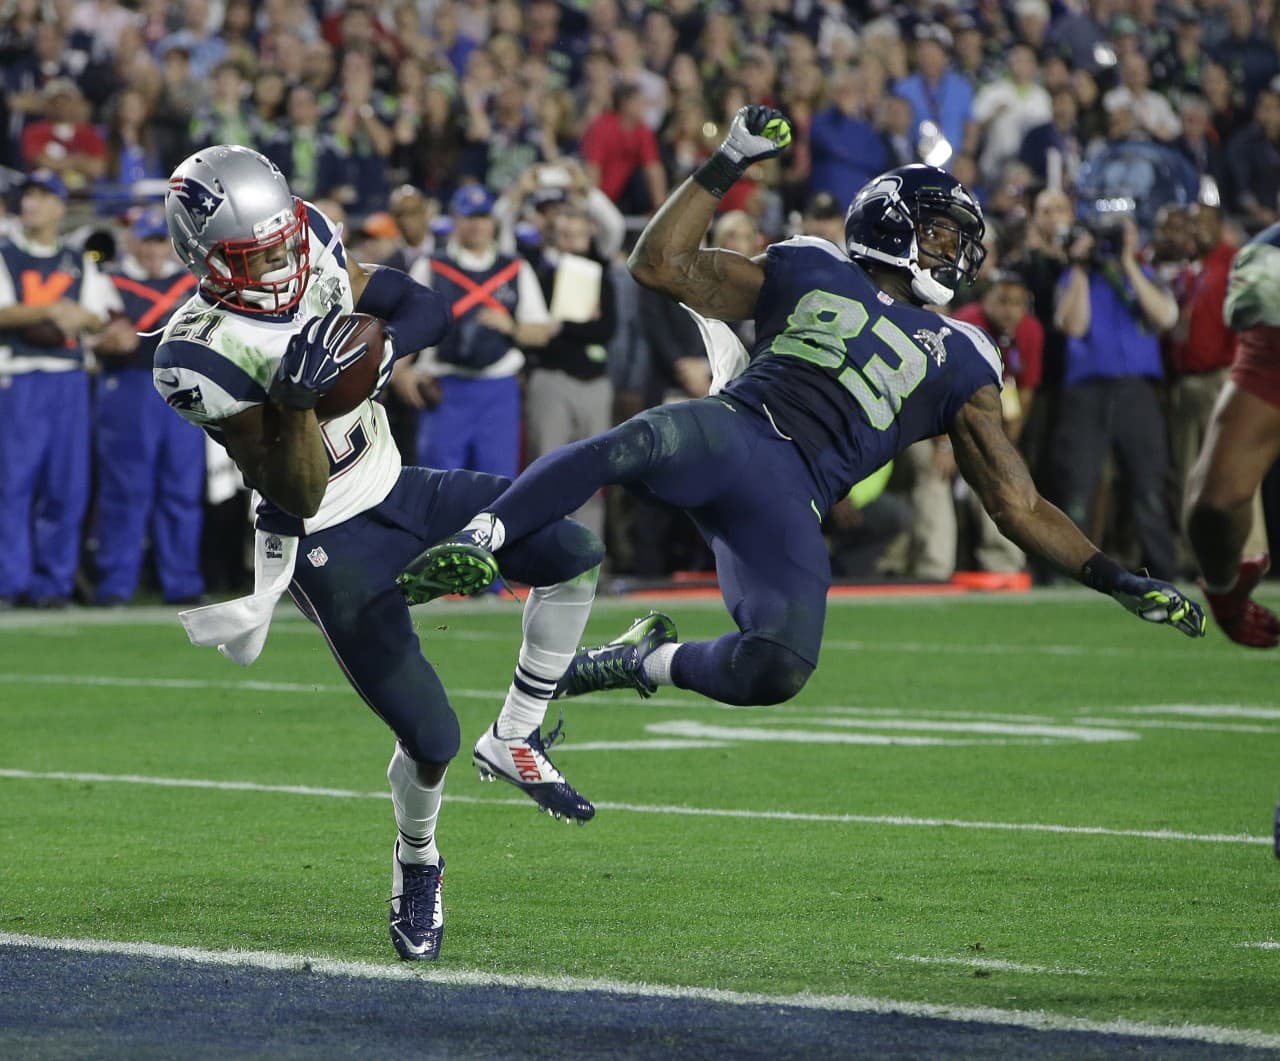 New England Patriots strong safety Malcolm Butler (21) intercepts a pass intended for Seattle Seahawks wide receiver Ricardo Lockette (83) during the second half of NFL Super Bowl XLIX. (Kathy Willens/AP)